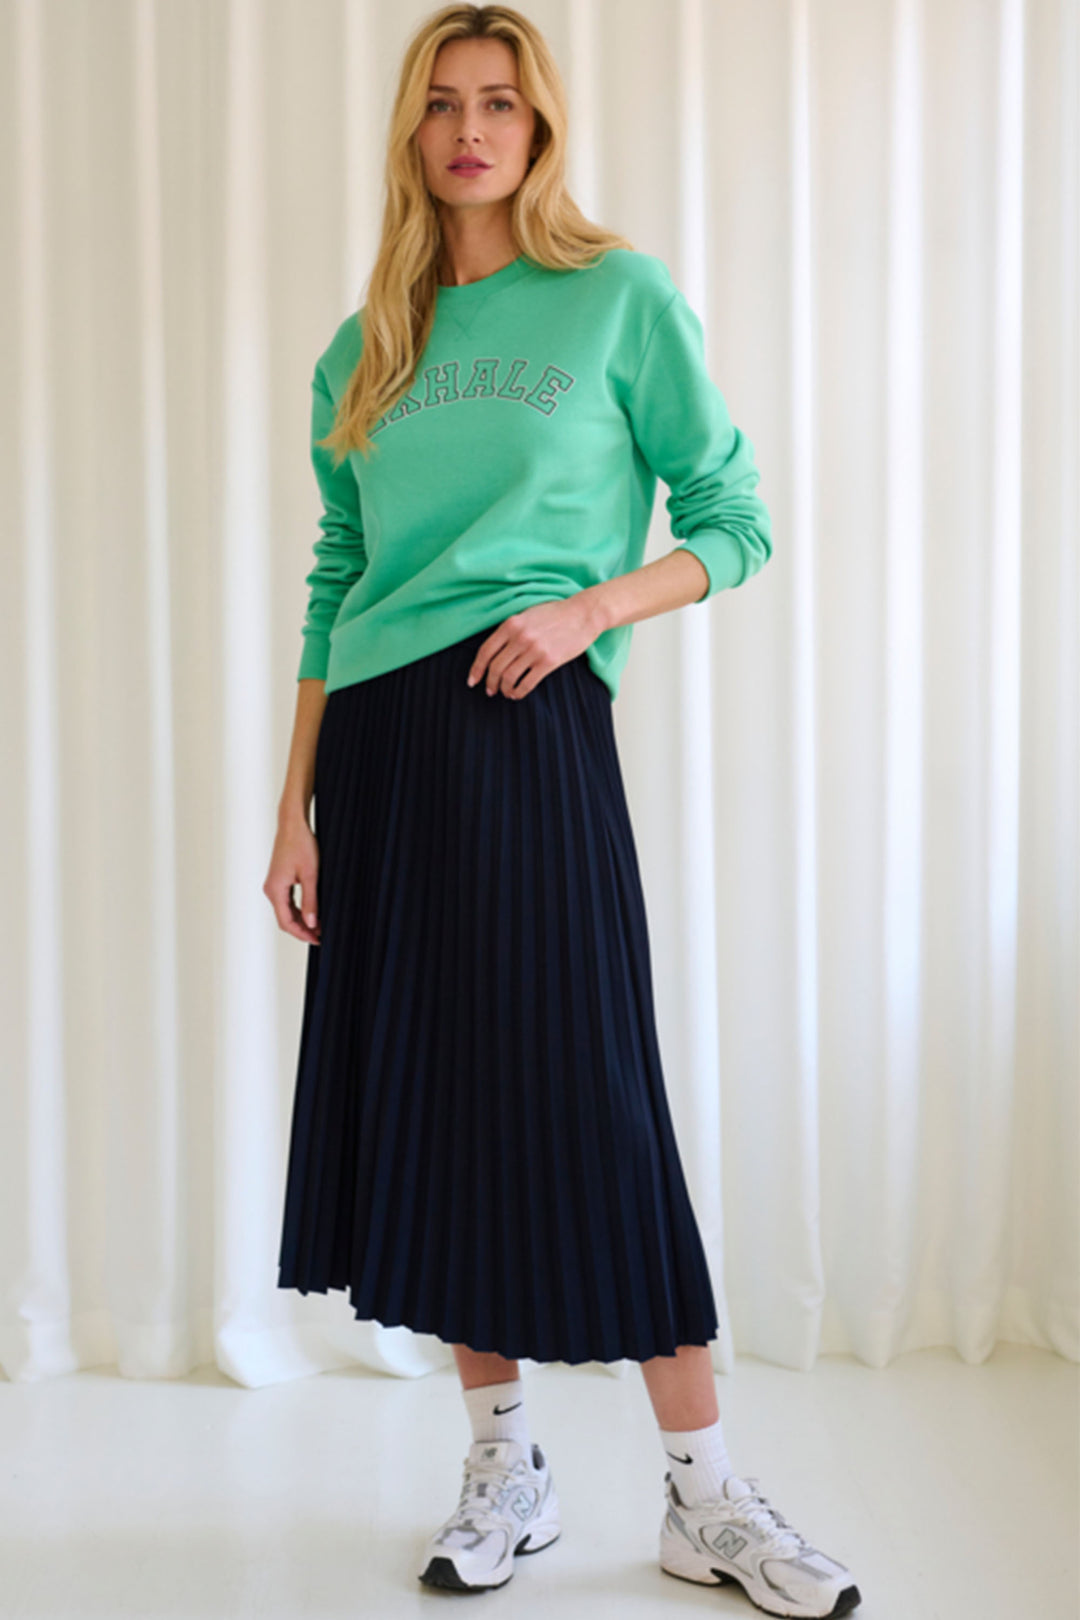 Timeless and always elegant, this midi-length skirt features a comfortable elastic waist for the perfect fit.